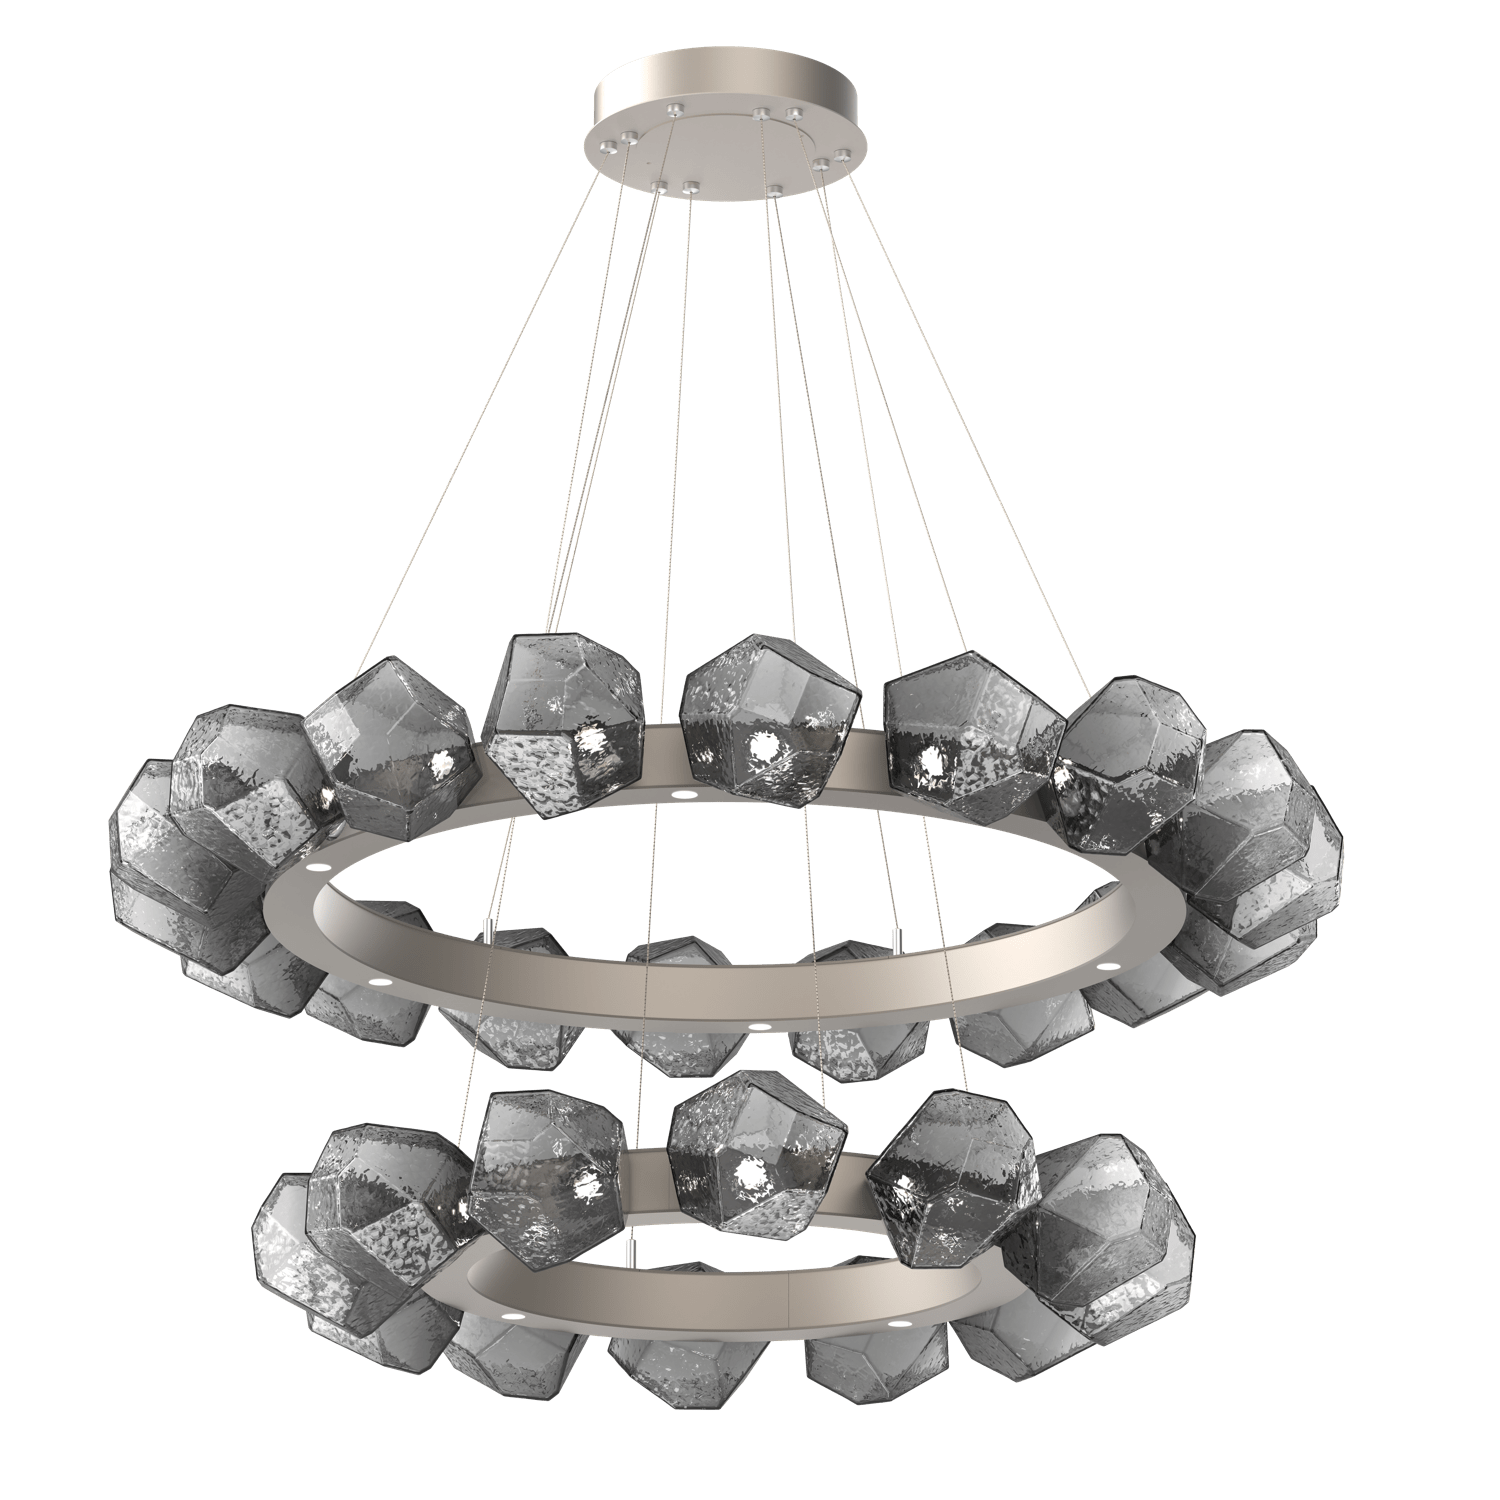 CHB0039-2T-BS-S-Hammerton-Studio-Gem-48-inch-two-tier-radial-ring-chandelier-with-metallic-beige-silver-finish-and-smoke-blown-glass-shades-and-LED-lamping